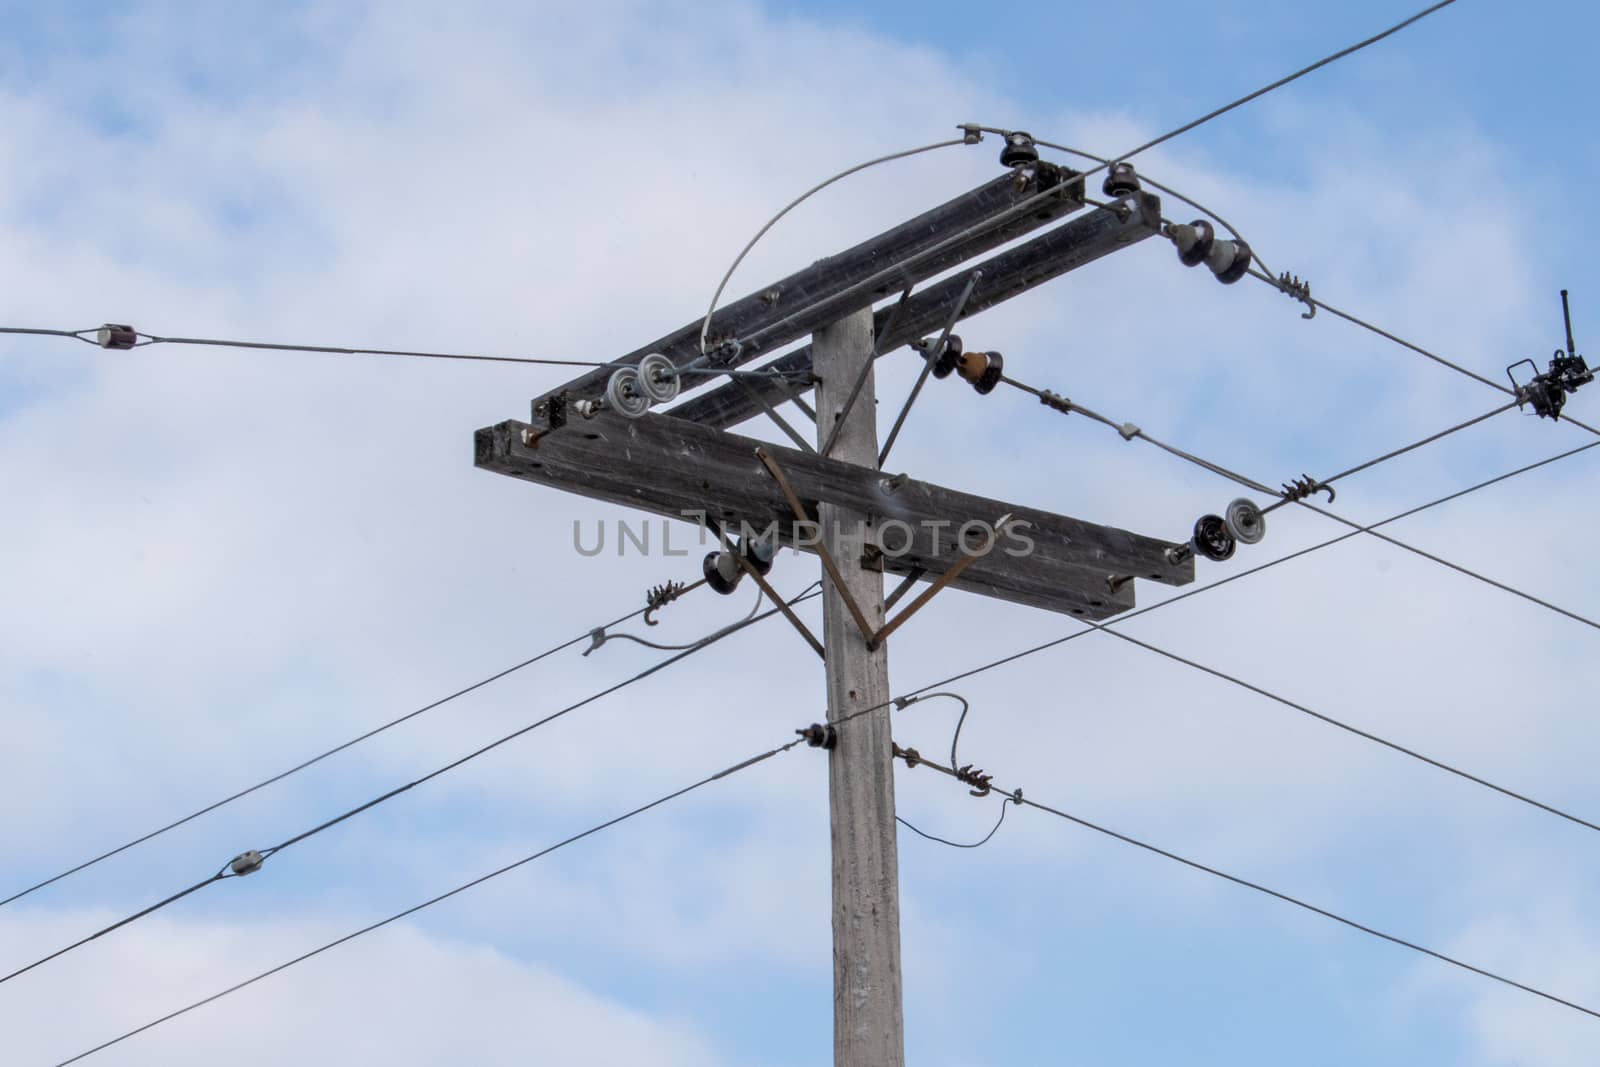 A rural junction of electrical wires is elevated by a wooden pole. The connections of power lines transmit electricity in all directions, carrying them to nearby homes and towns.